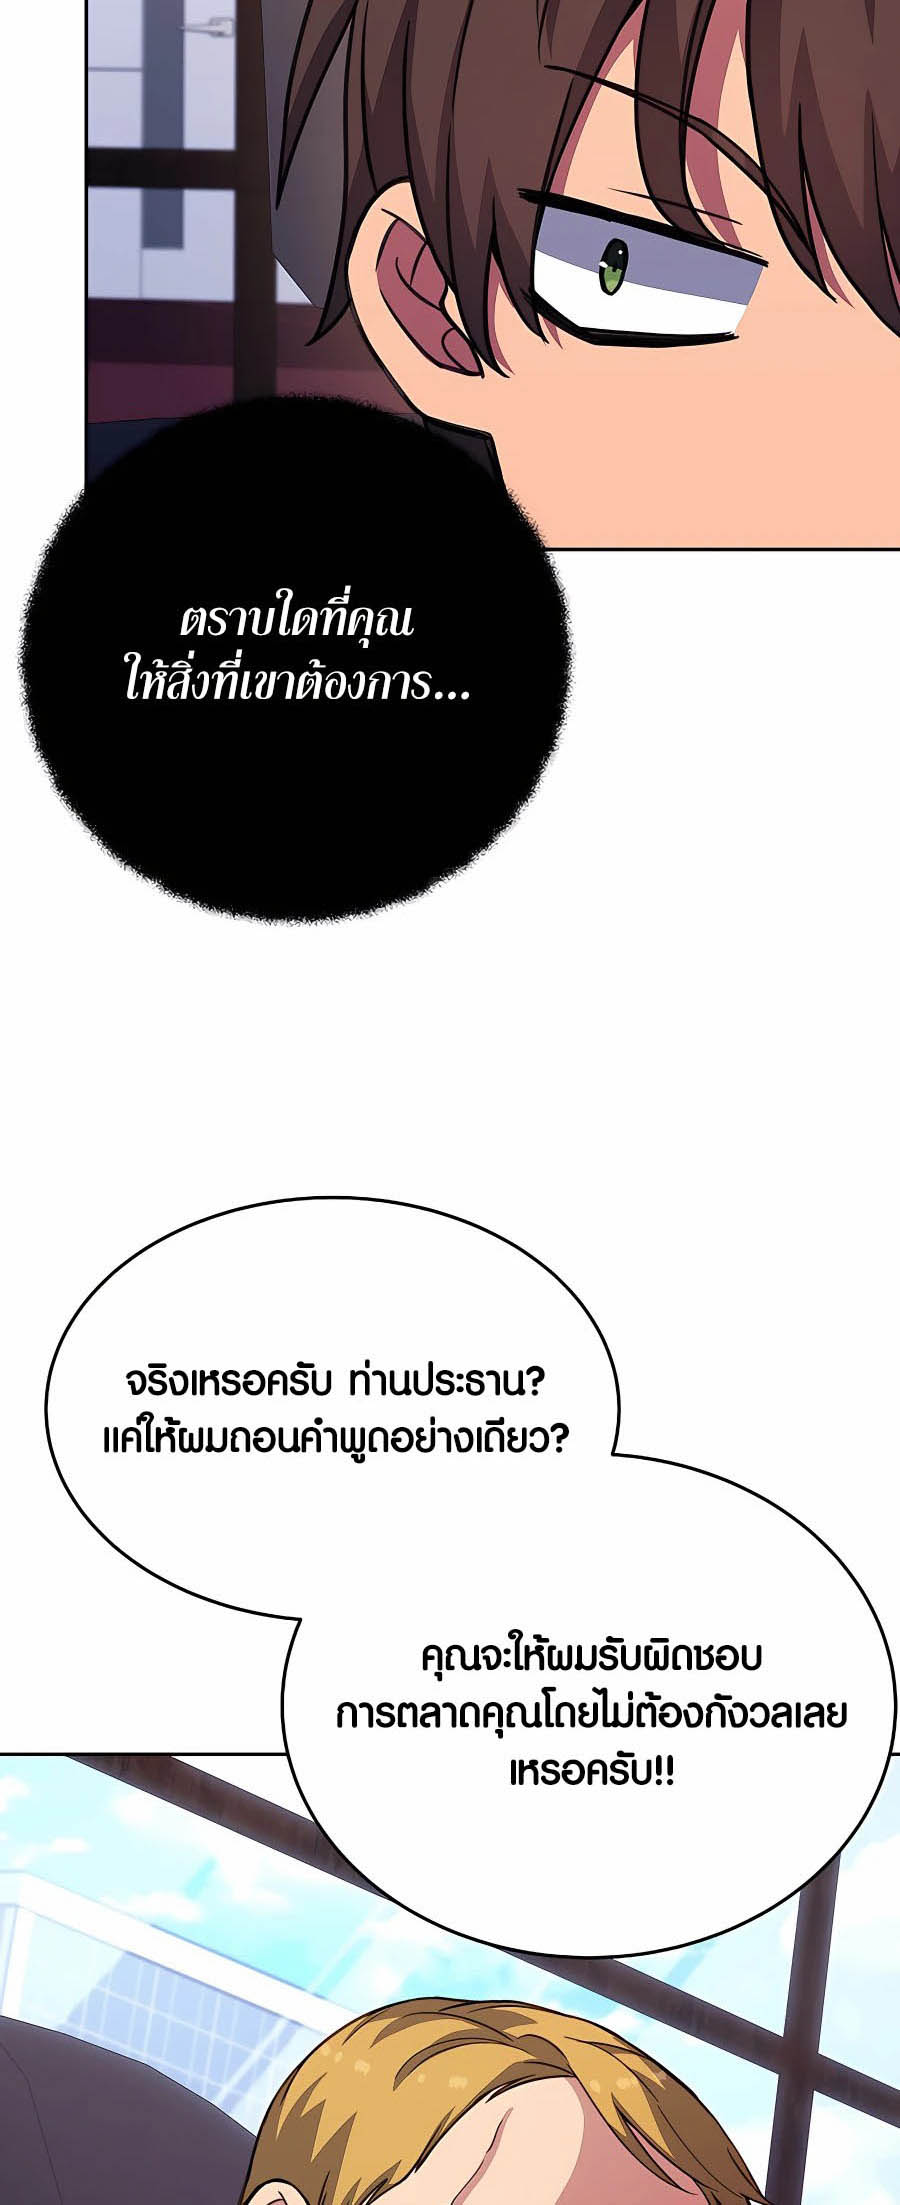 à¸­à¹ˆà¸²à¸™à¸¡à¸±à¸™à¸®à¸§à¸² à¹€à¸£à¸·à¹ˆà¸­à¸‡ The Part Time Land of the Gods 56 21